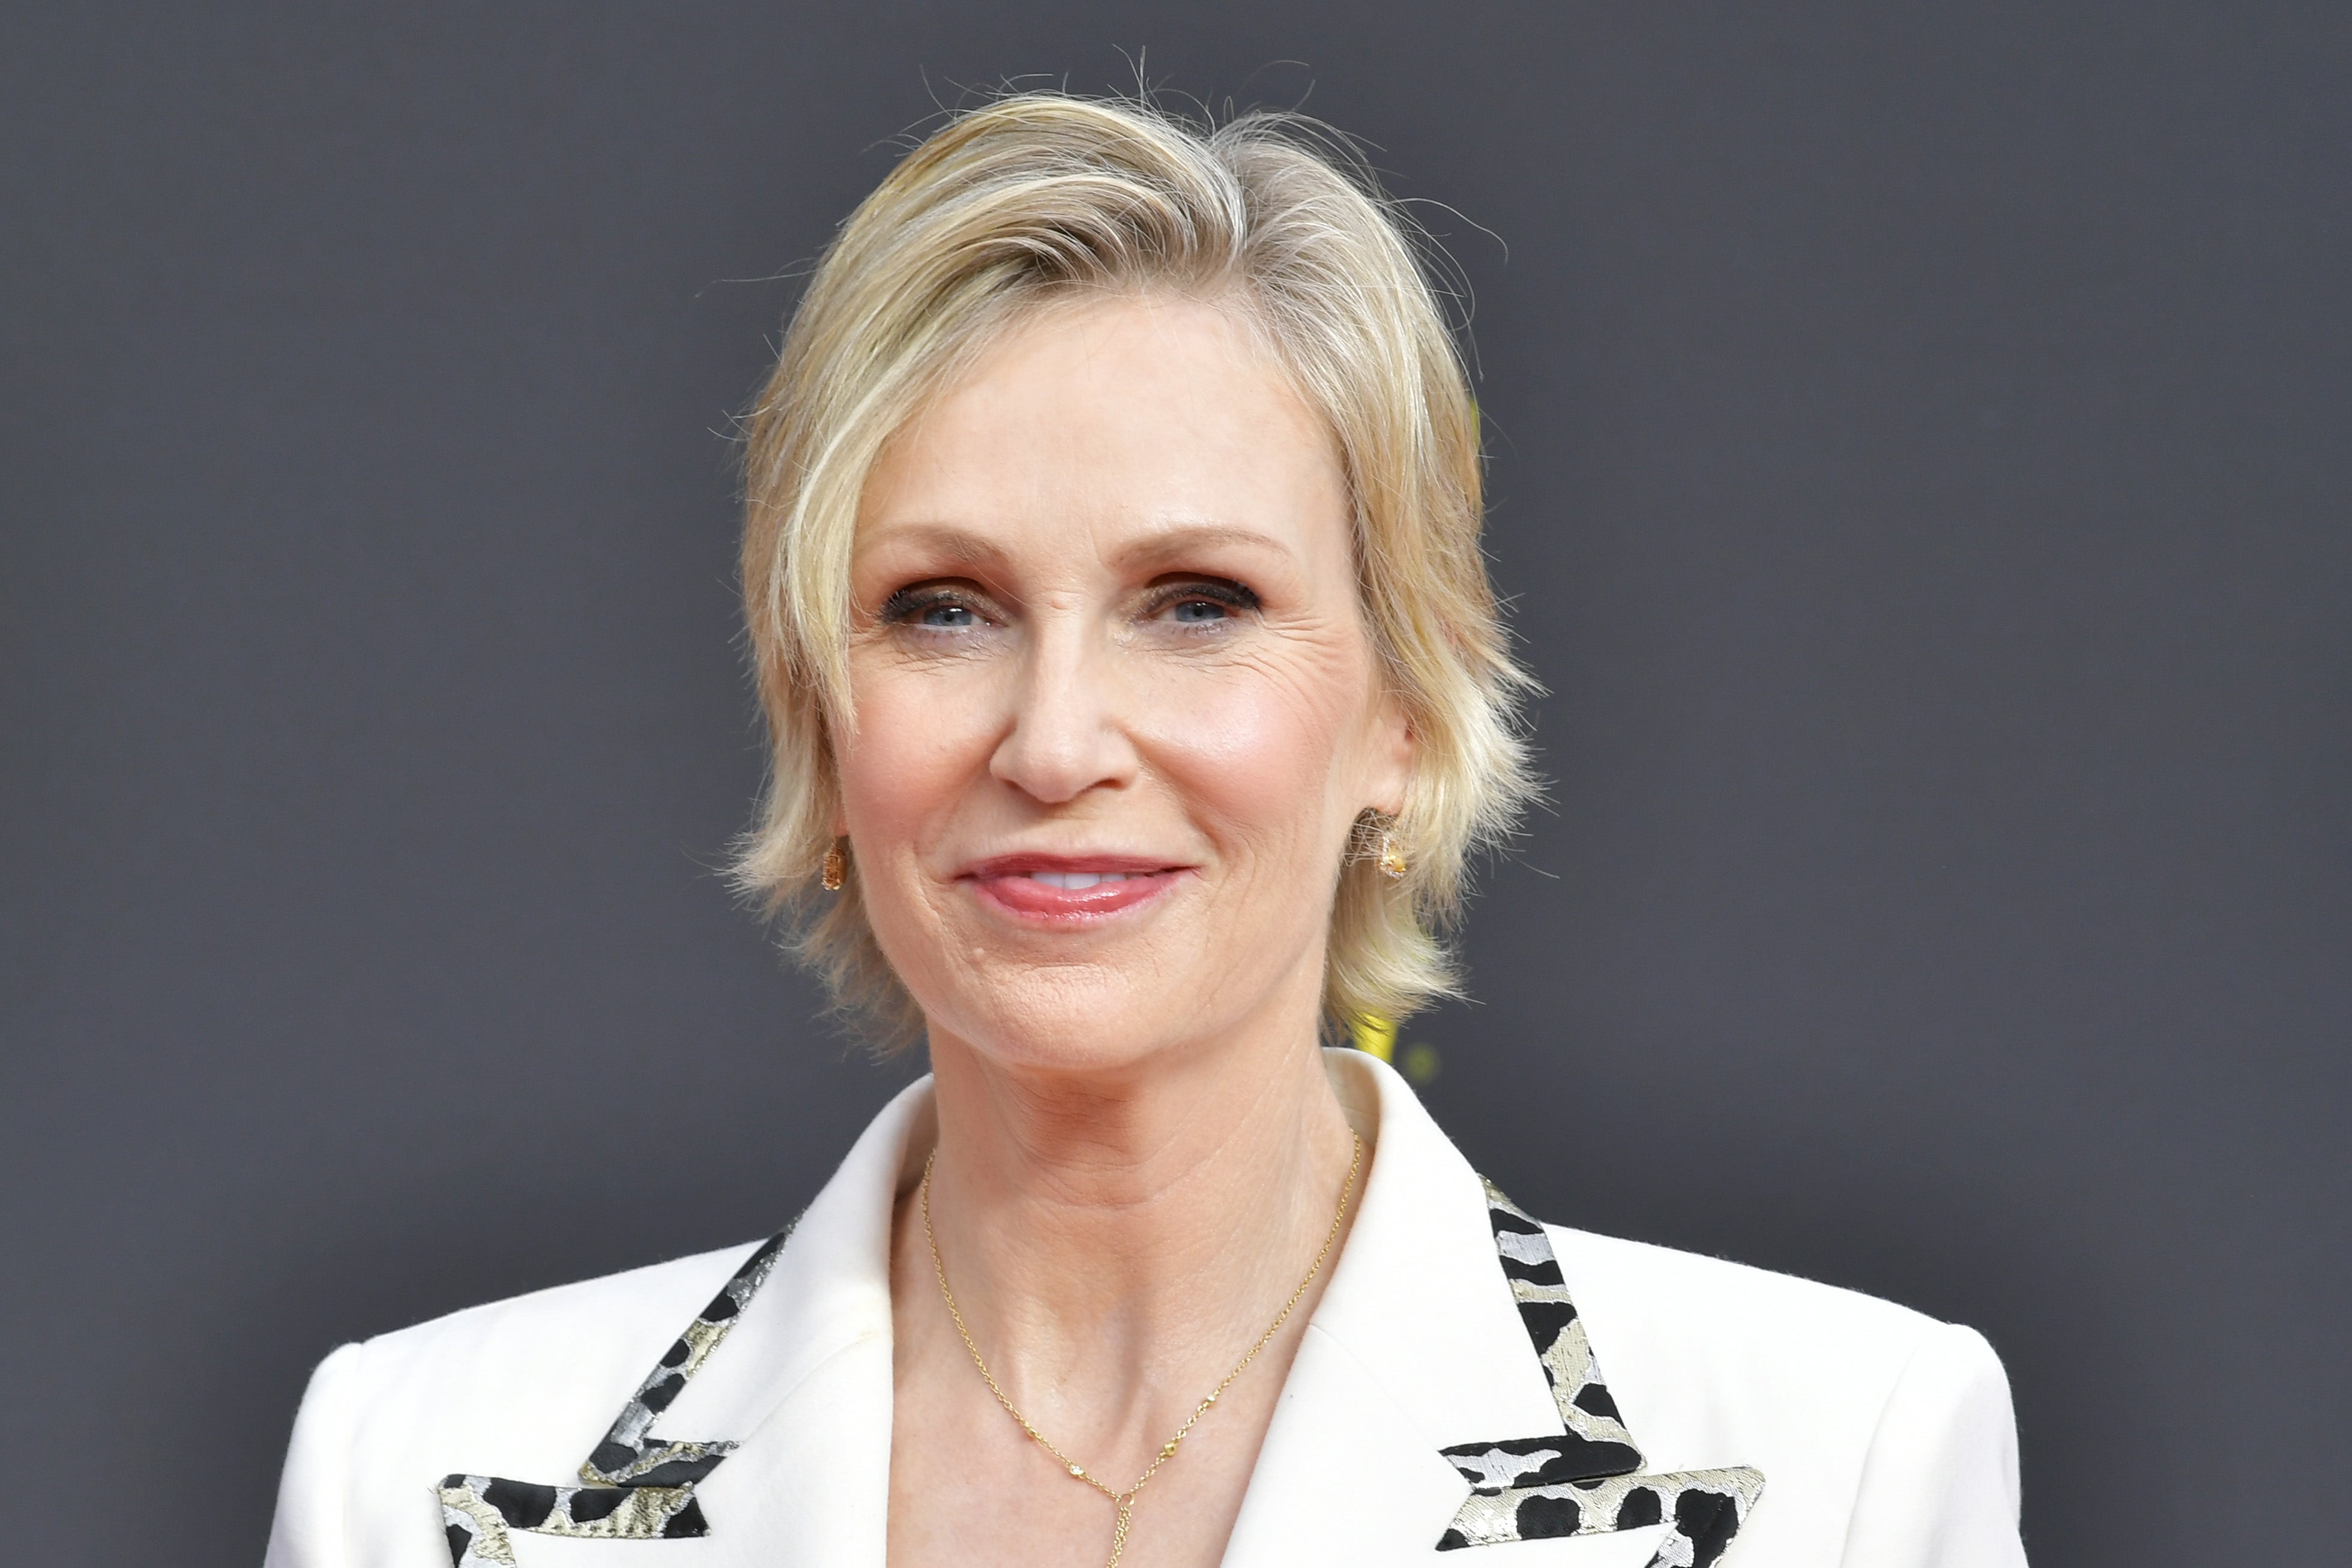 Jane Lynch suggests women lower pitch when recording podcasts